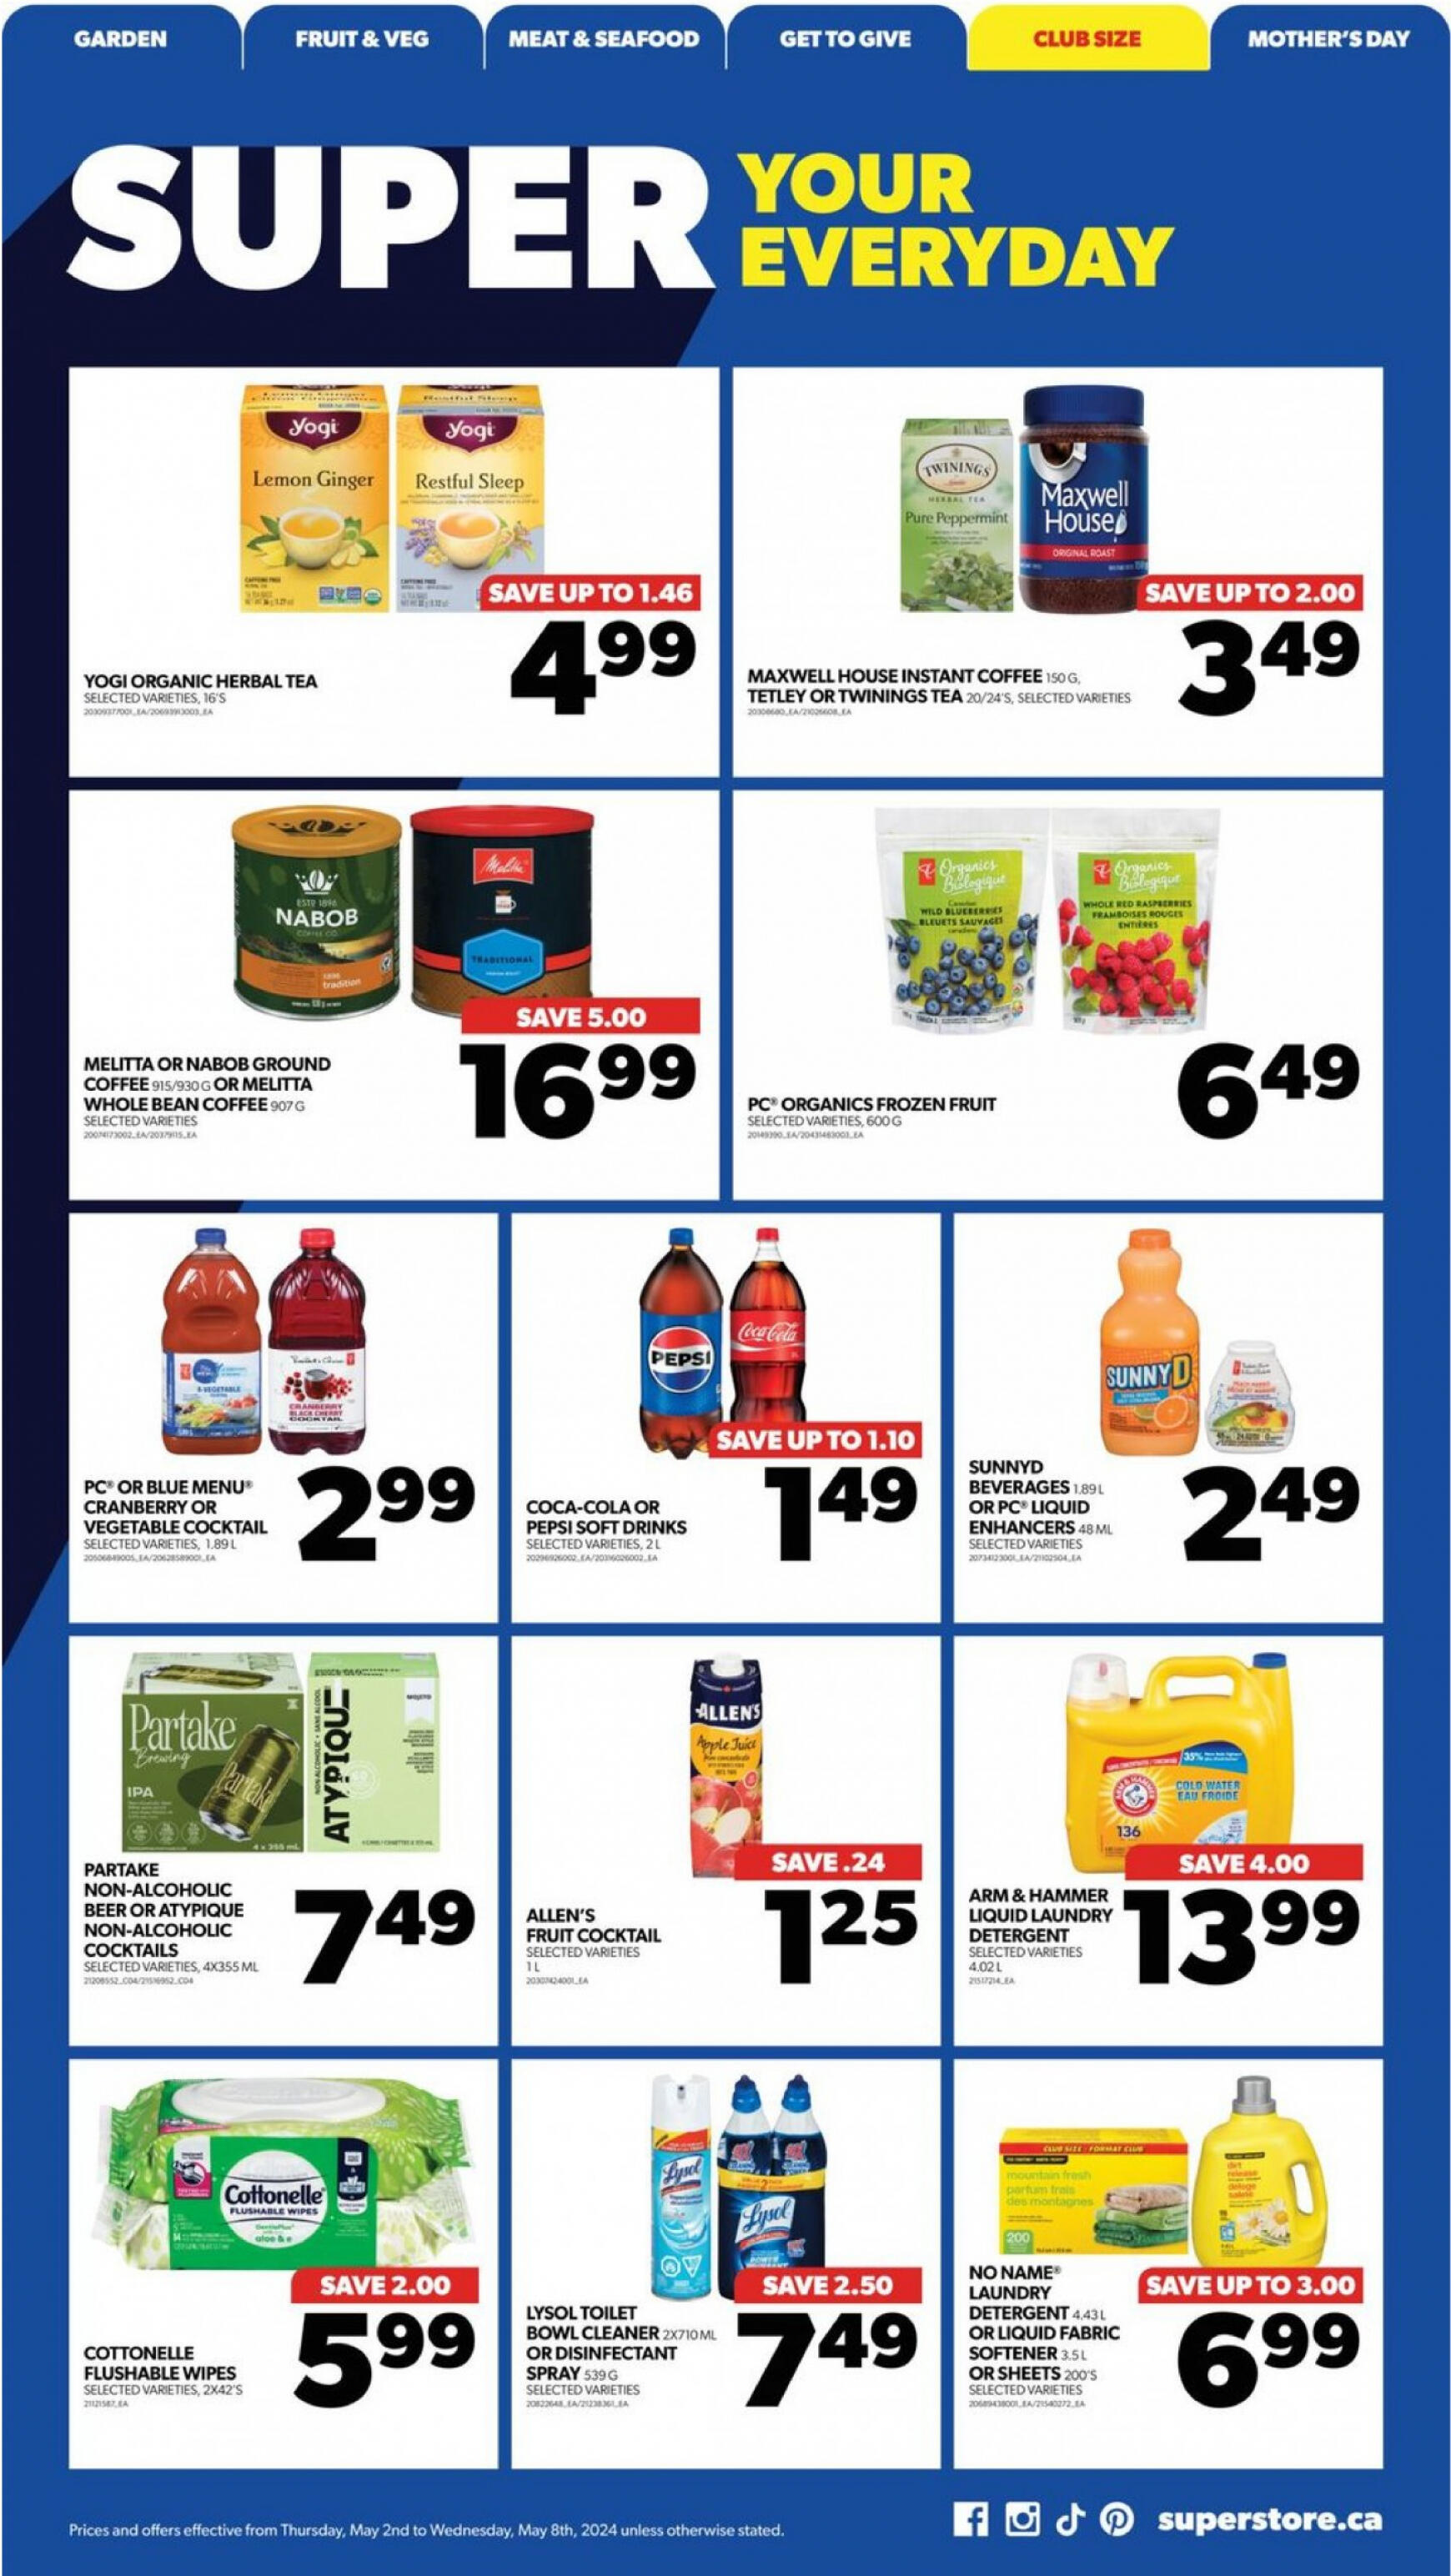 real-canadian-superstore - Real Canadian Superstore flyer current 02.05. - 08.05. - page: 21